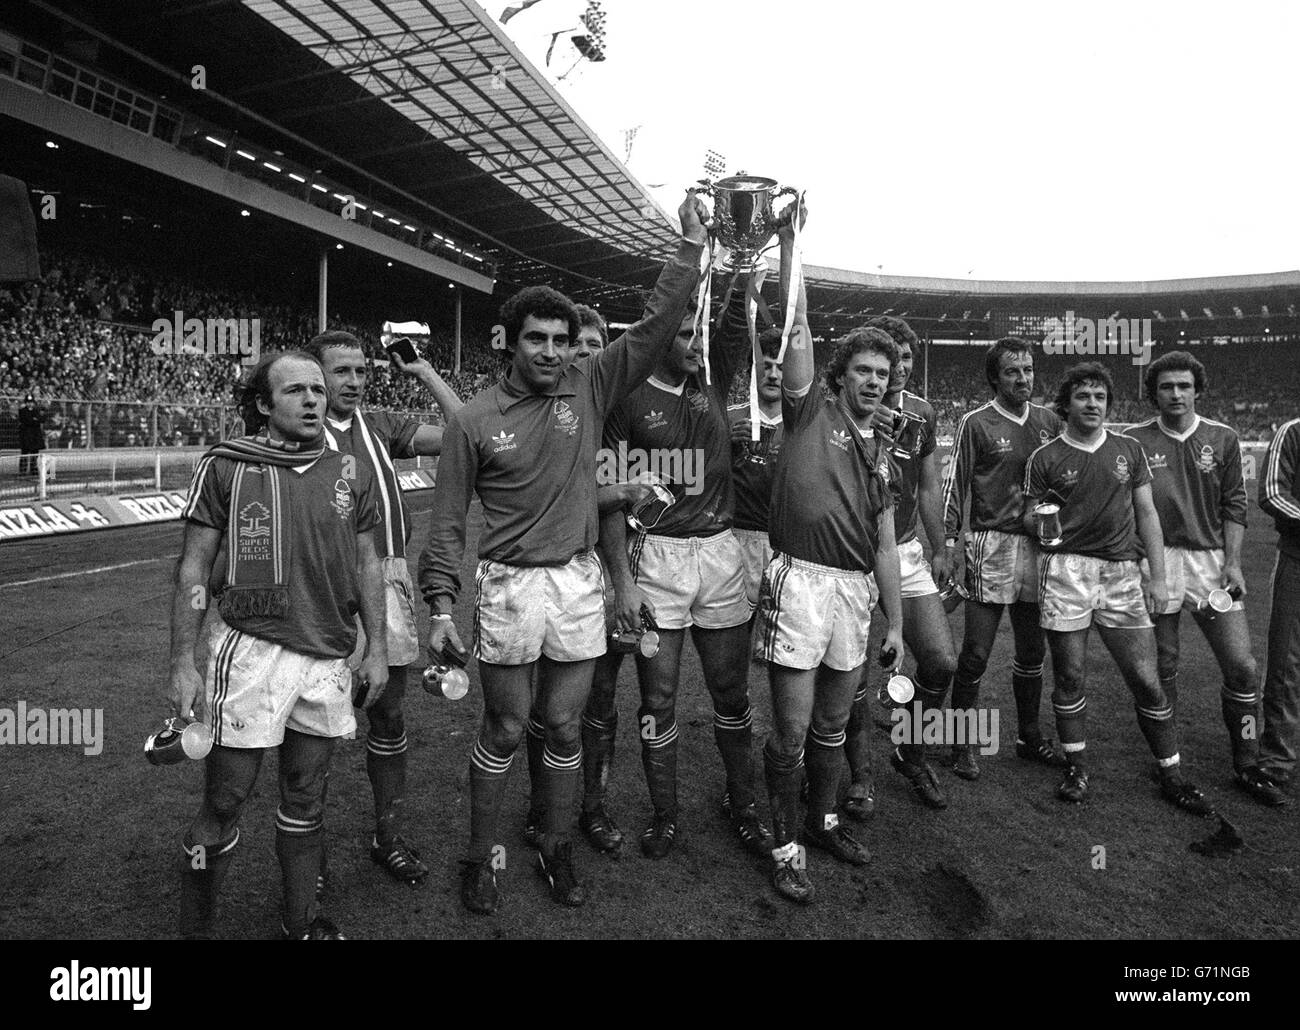 Nottingham Forest parading the League Cup at Wembley after they retained the trophy with a 3-2 victory over Southampton. Forest players are (from left) Archie Gemmill, John McGovern, Peter Shilton, Colin Barrett, Larry Lloyd, Garry Birtles, Tony Woodcock, Dave Needham, Frank Clark, John Robertson, and Martin O'Neill. Stock Photo